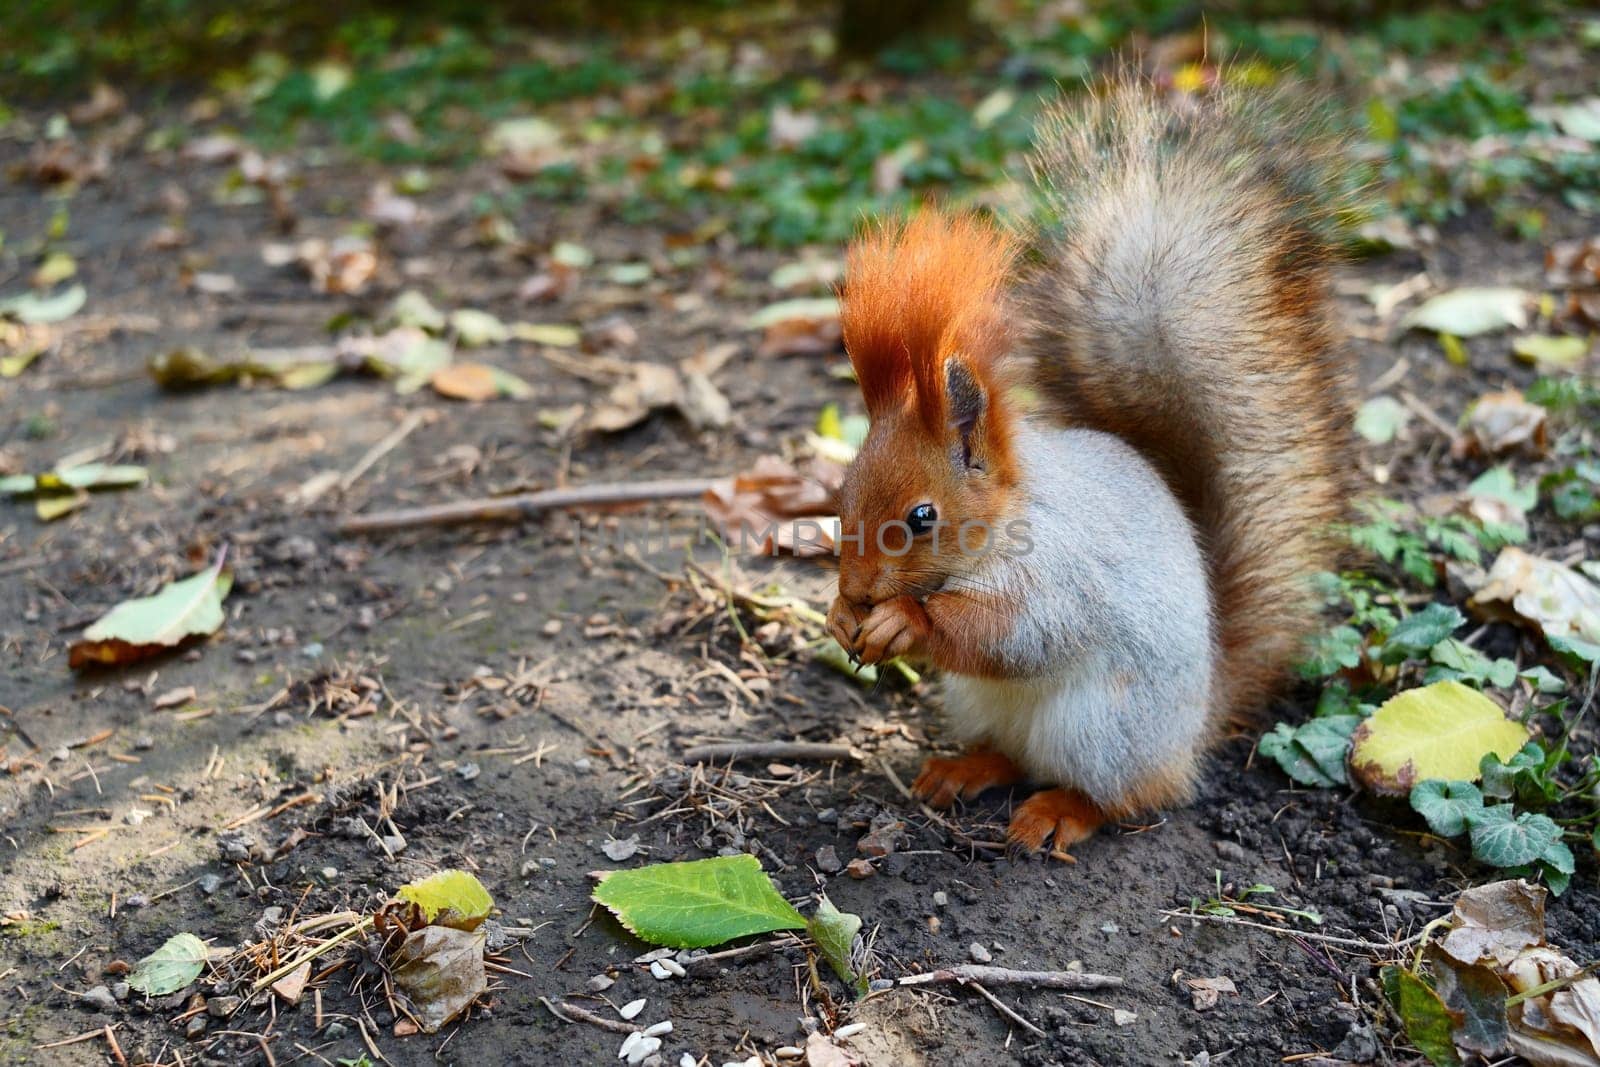 A gray red squirrel on the ground among the leaves eats a nut. by tewolf